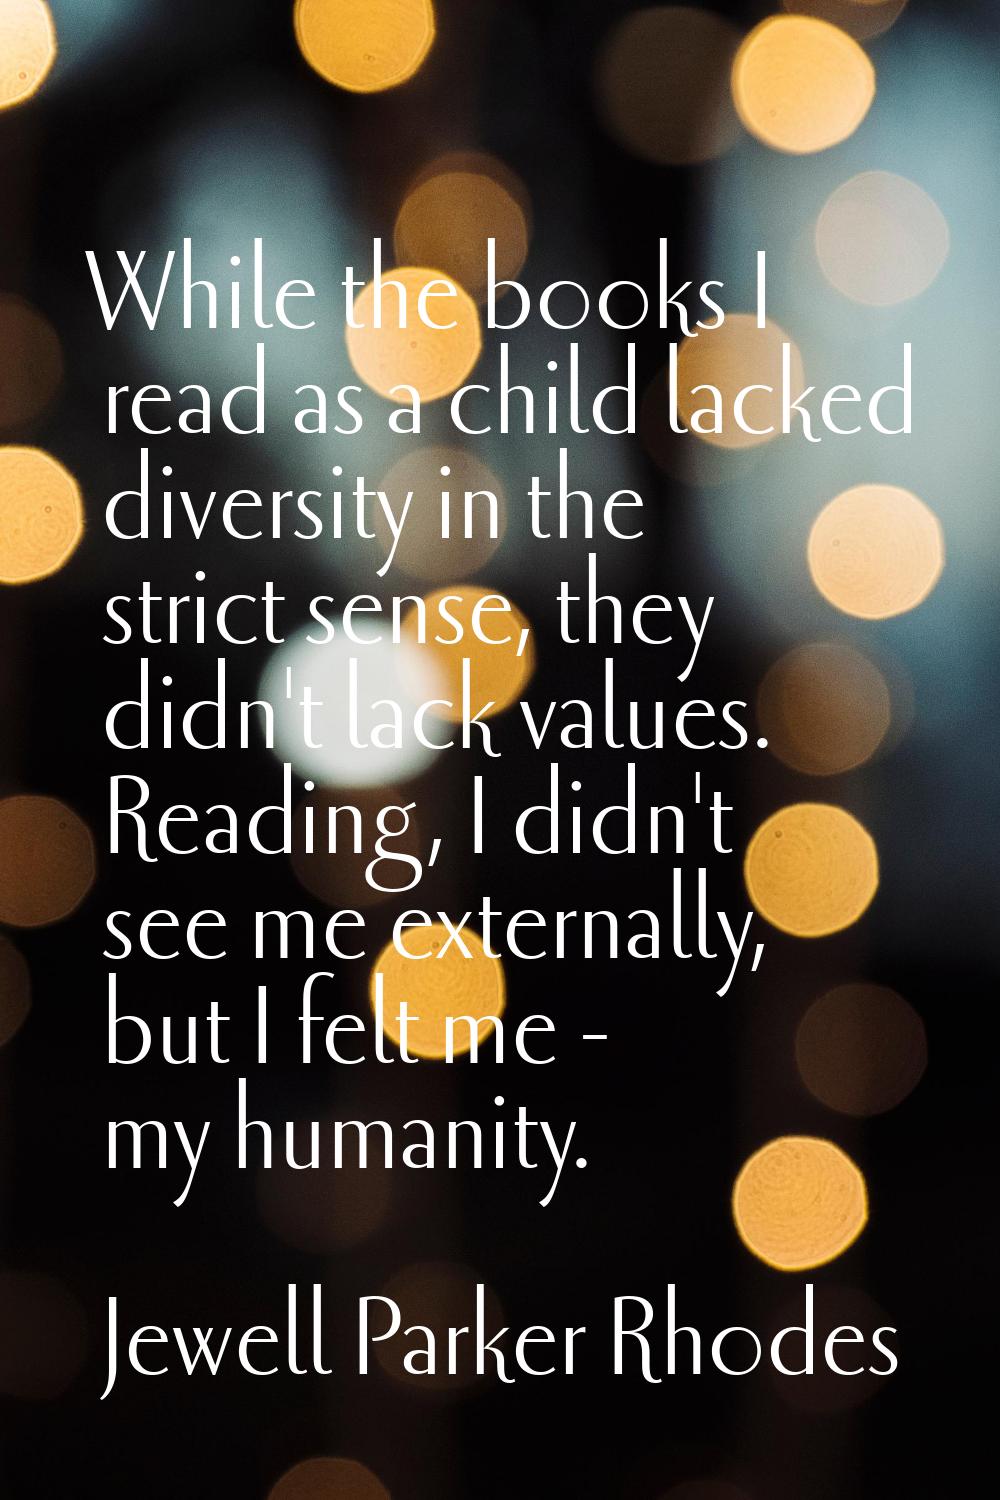 While the books I read as a child lacked diversity in the strict sense, they didn't lack values. Re